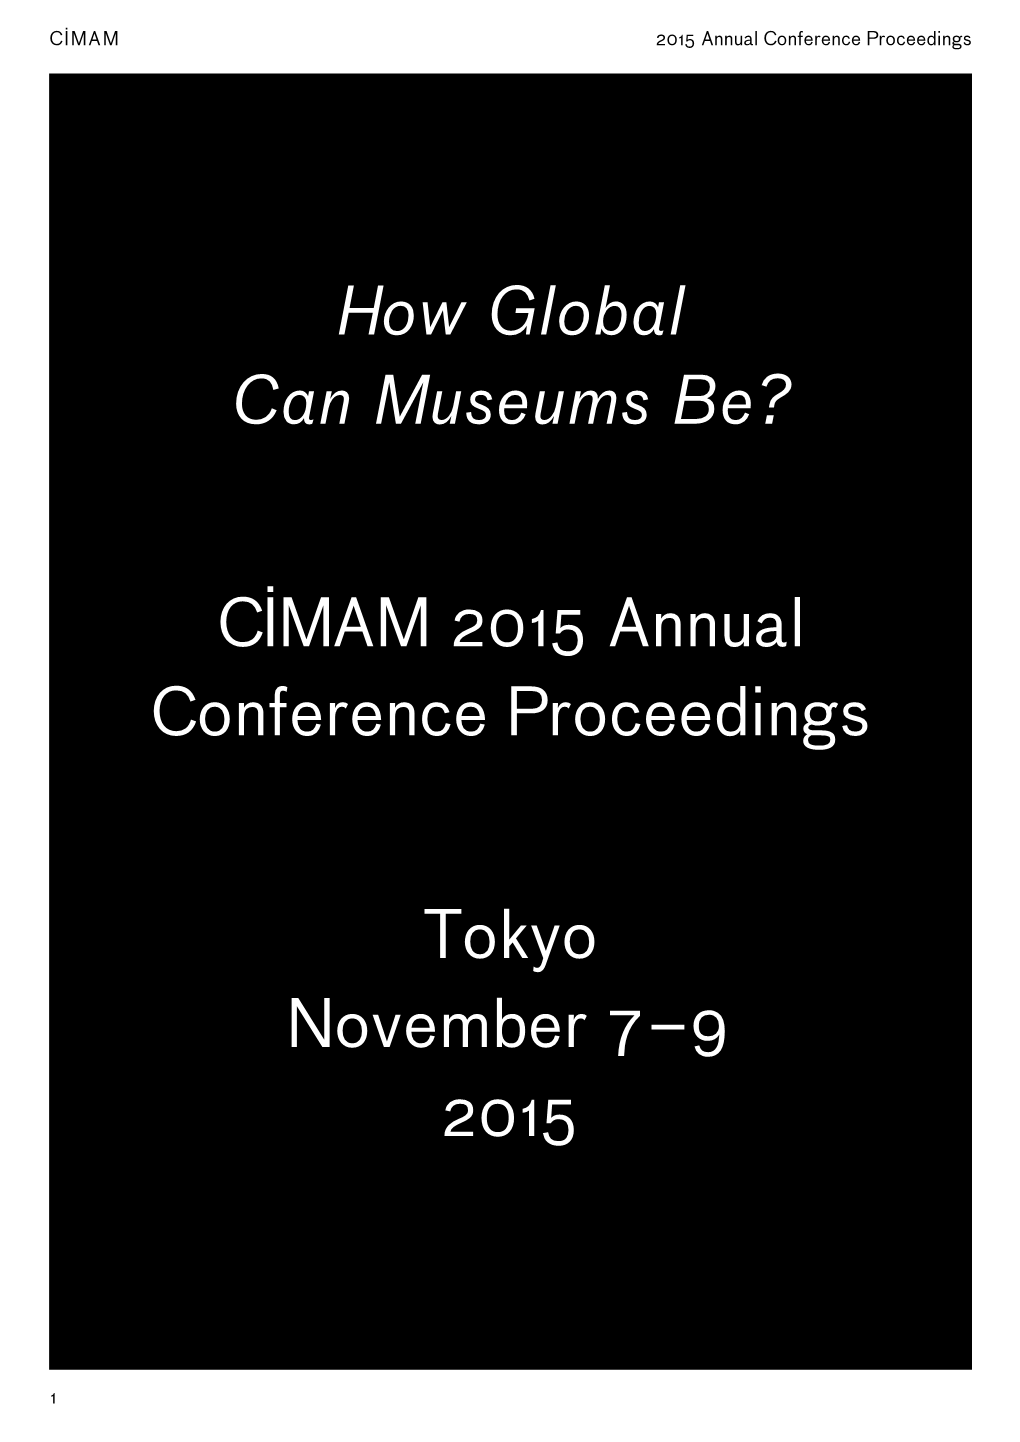 How Global Can Museums Be? CIMAM 2015 Annual Conference